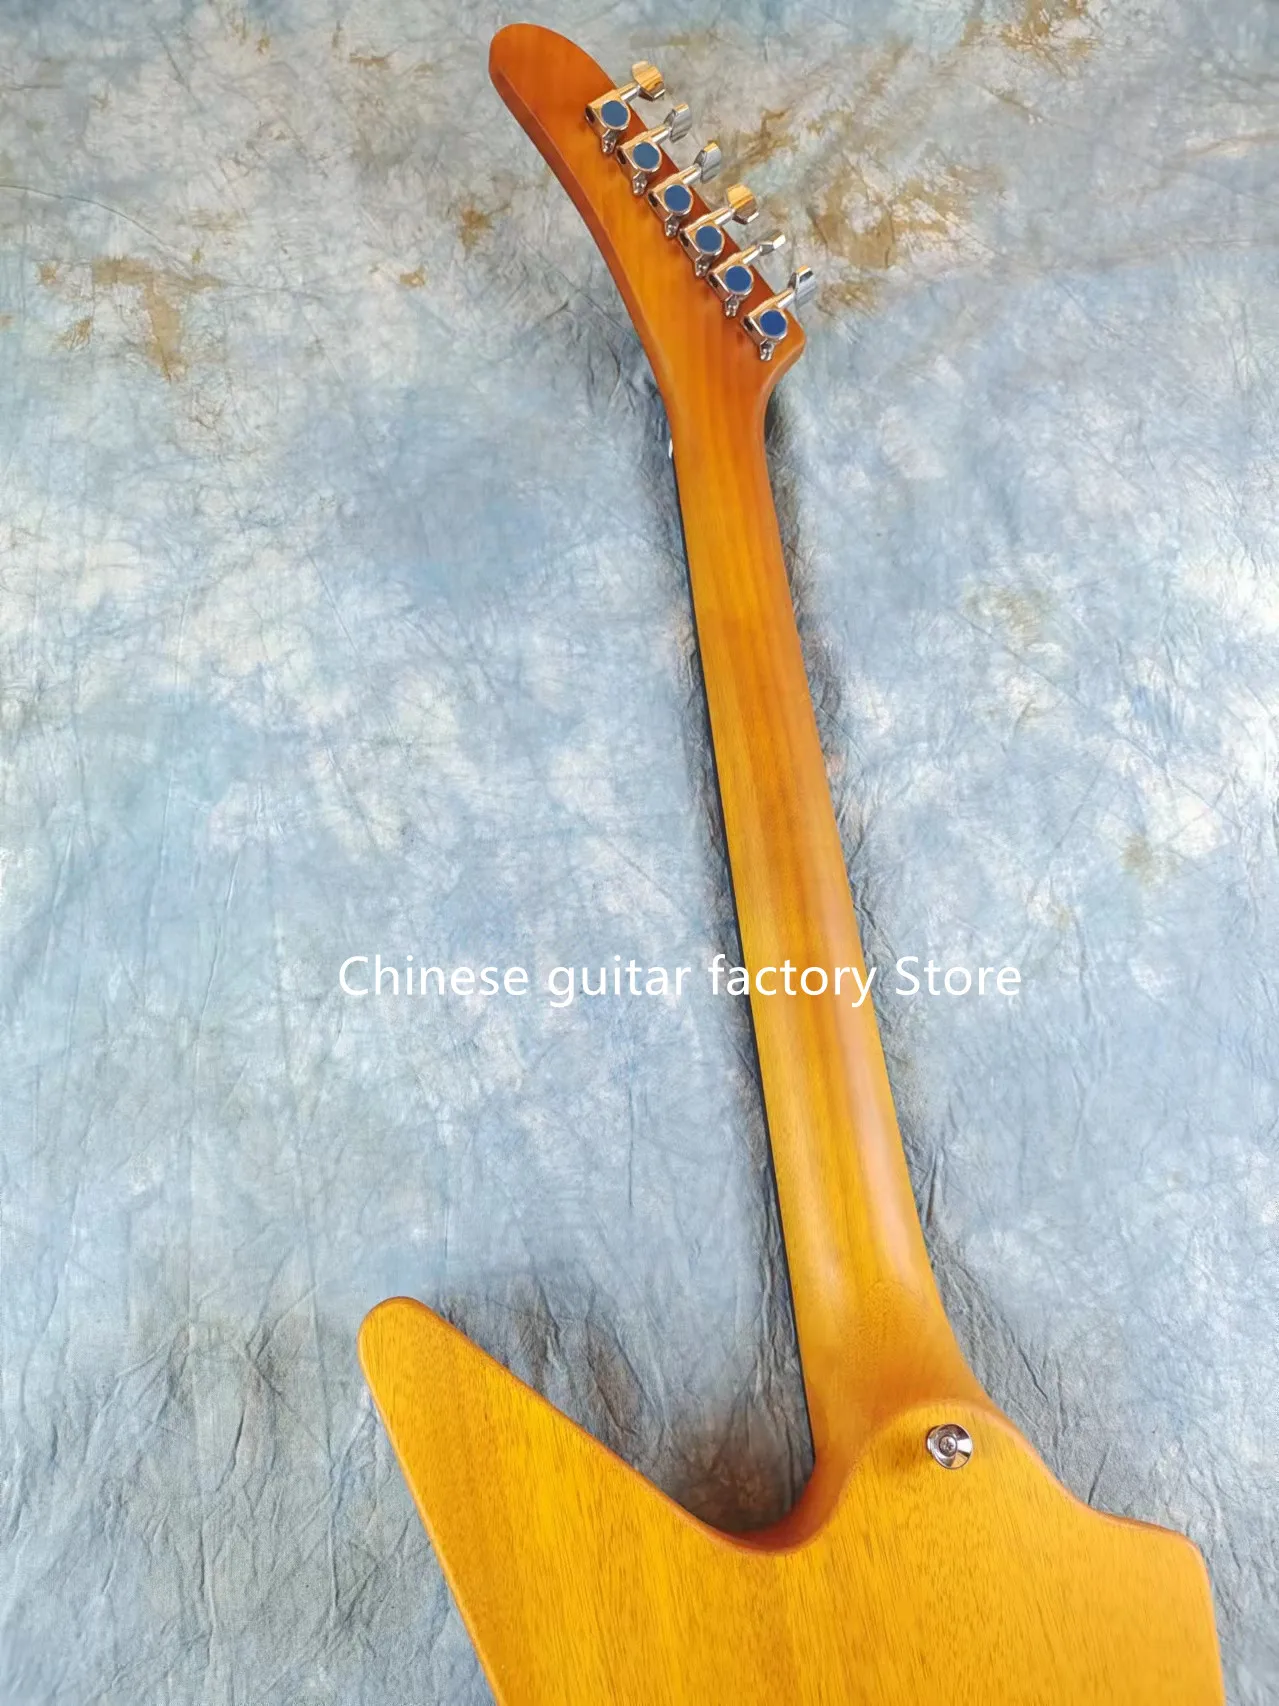 Cables High Quality Electric Guitar EET FUK Mahogany Body Matte Natural Wood Color In Stock Fast 